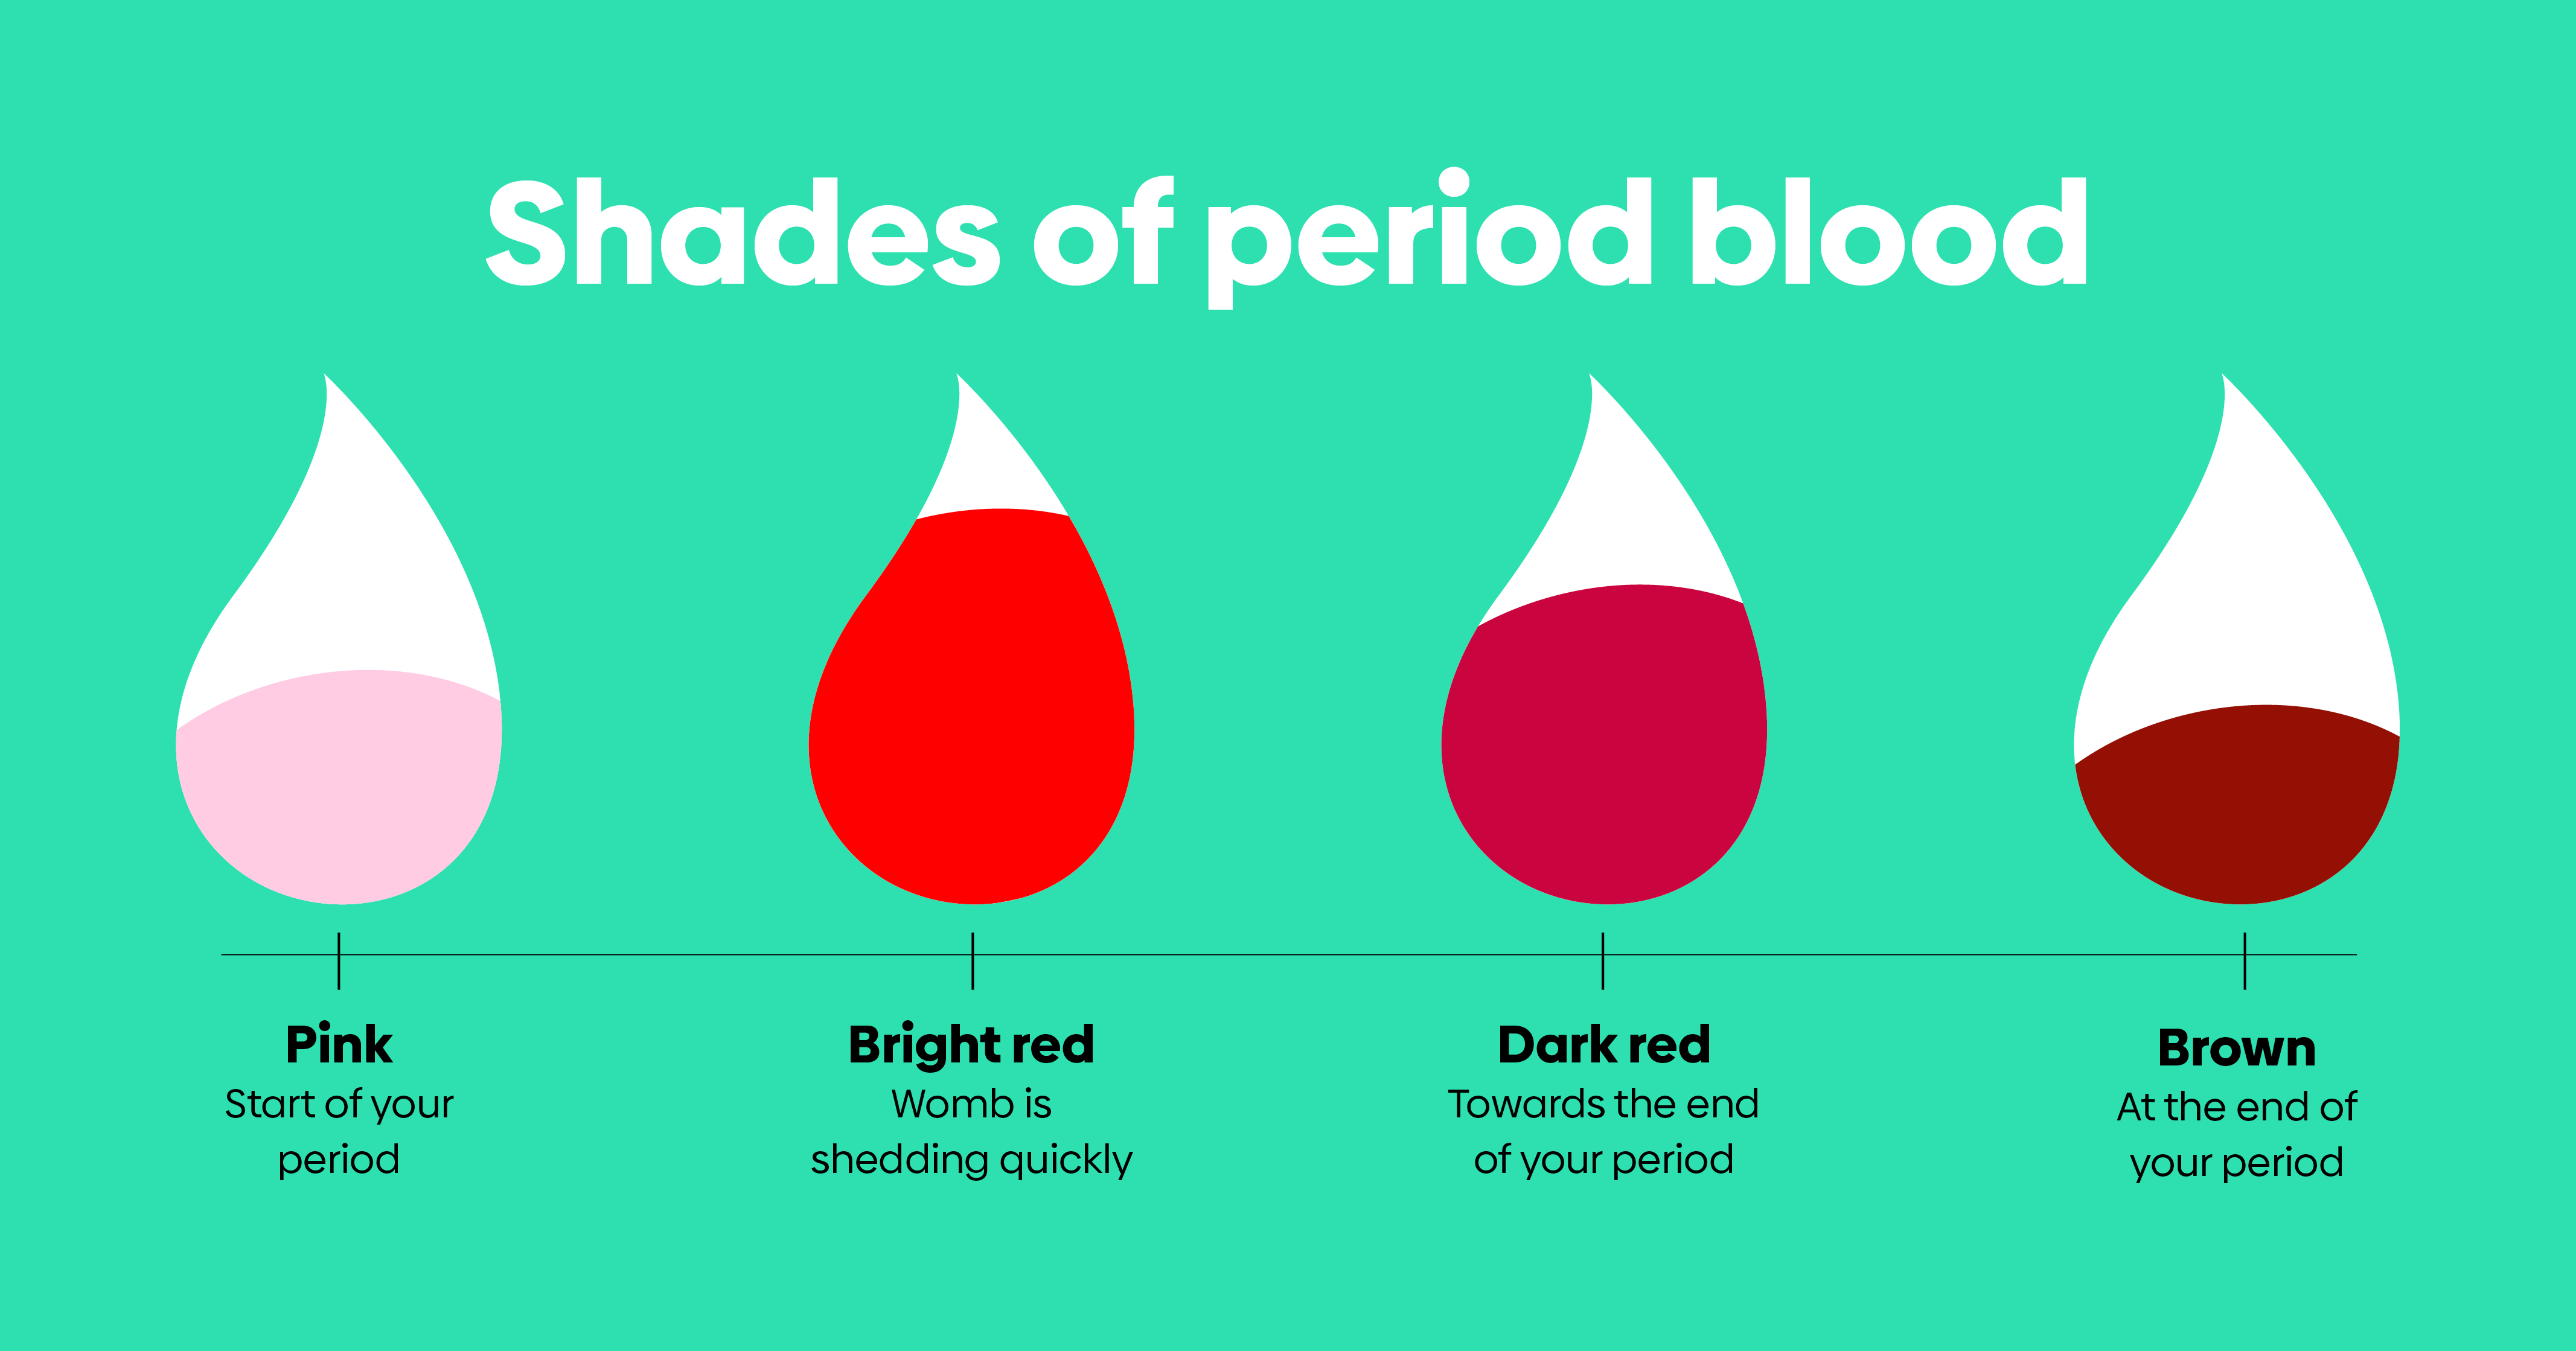 How Much Blood Do You Lose During Your Period?